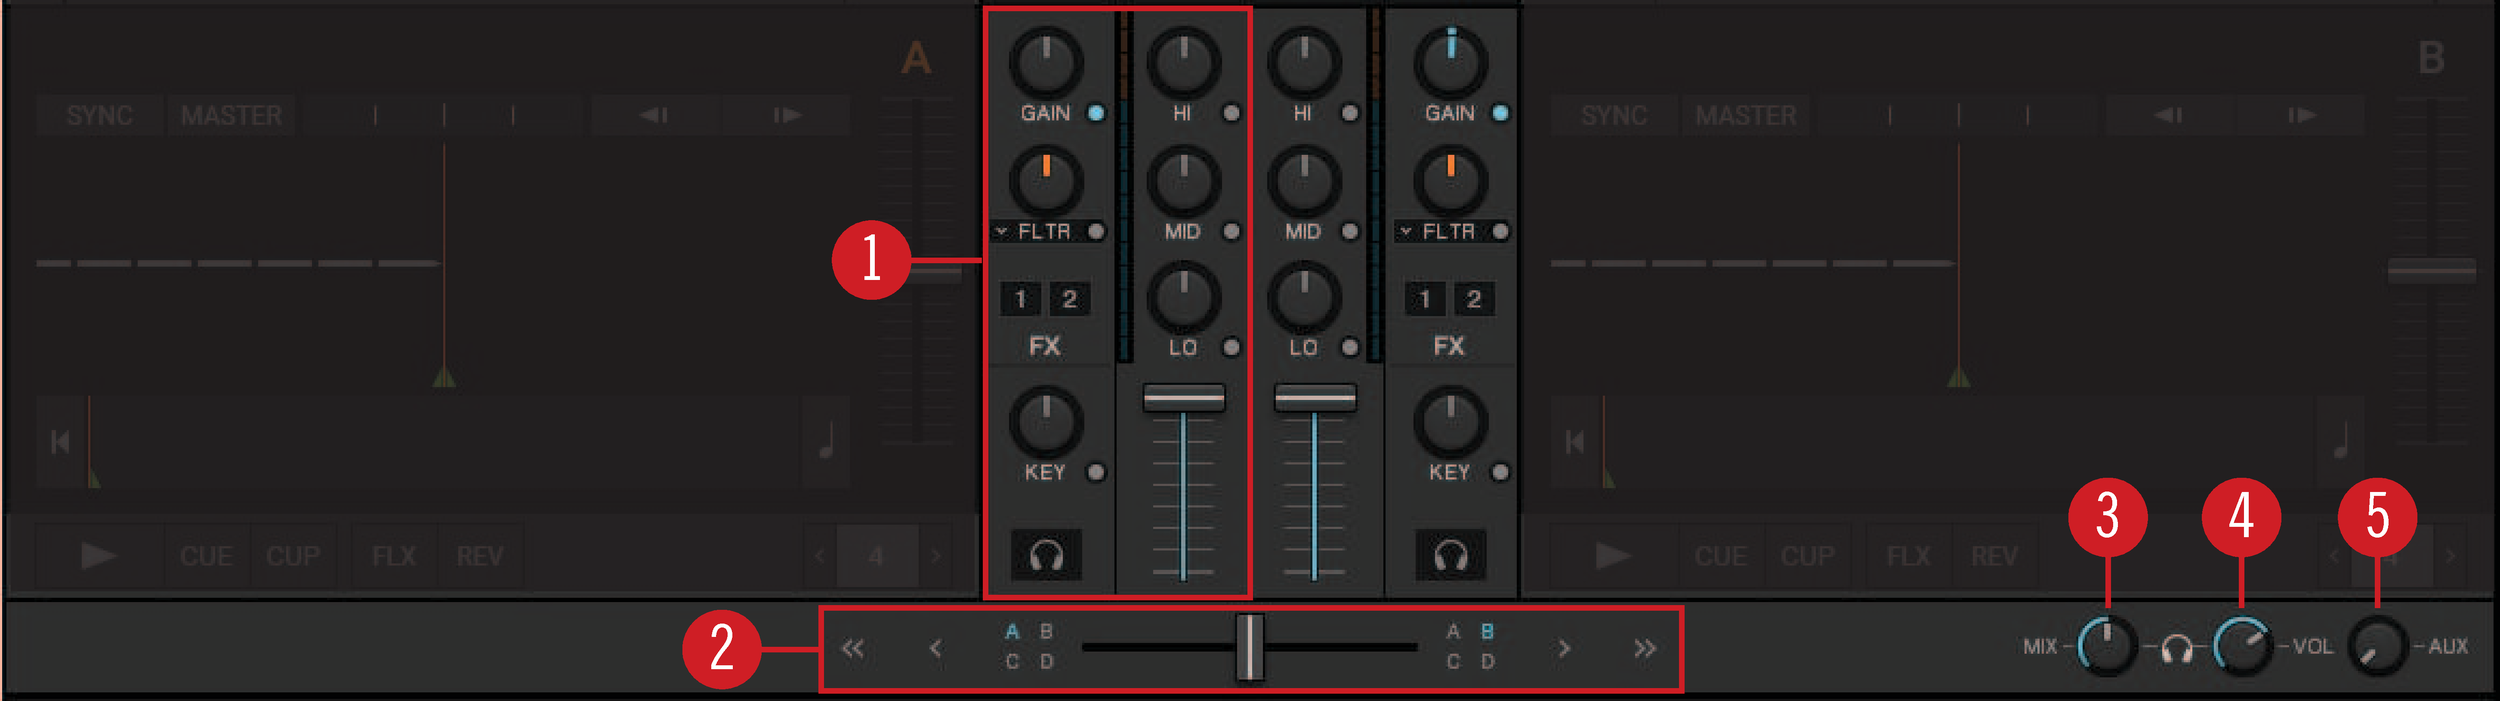 TP3_Overview_Mixer.png